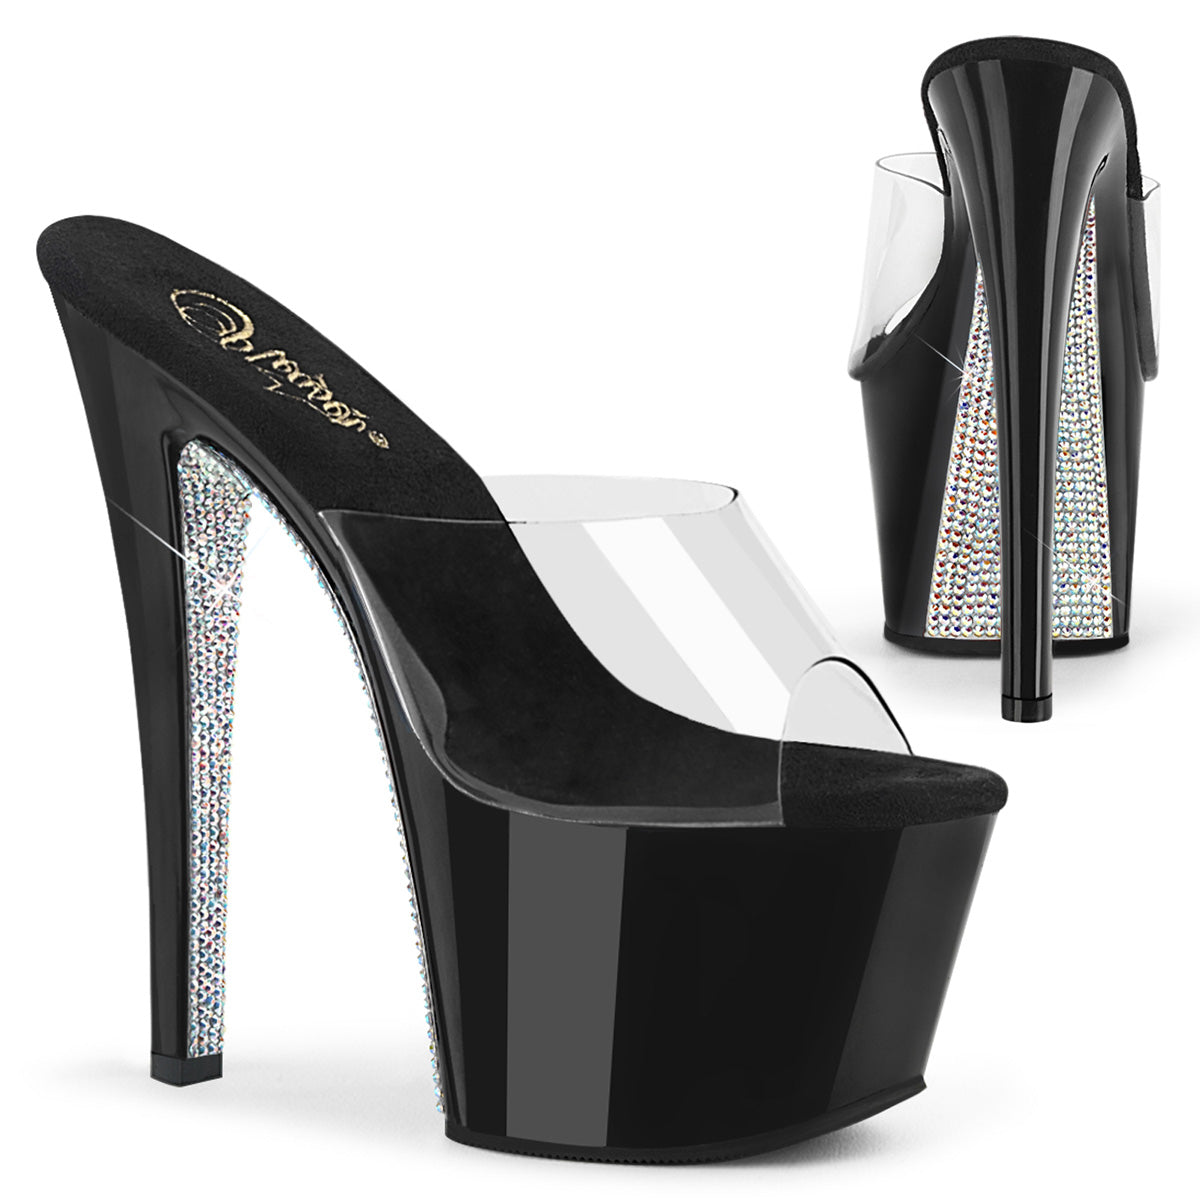 SKY-301CRS 7" Heel Clear & Black Silver Stripper Shoes